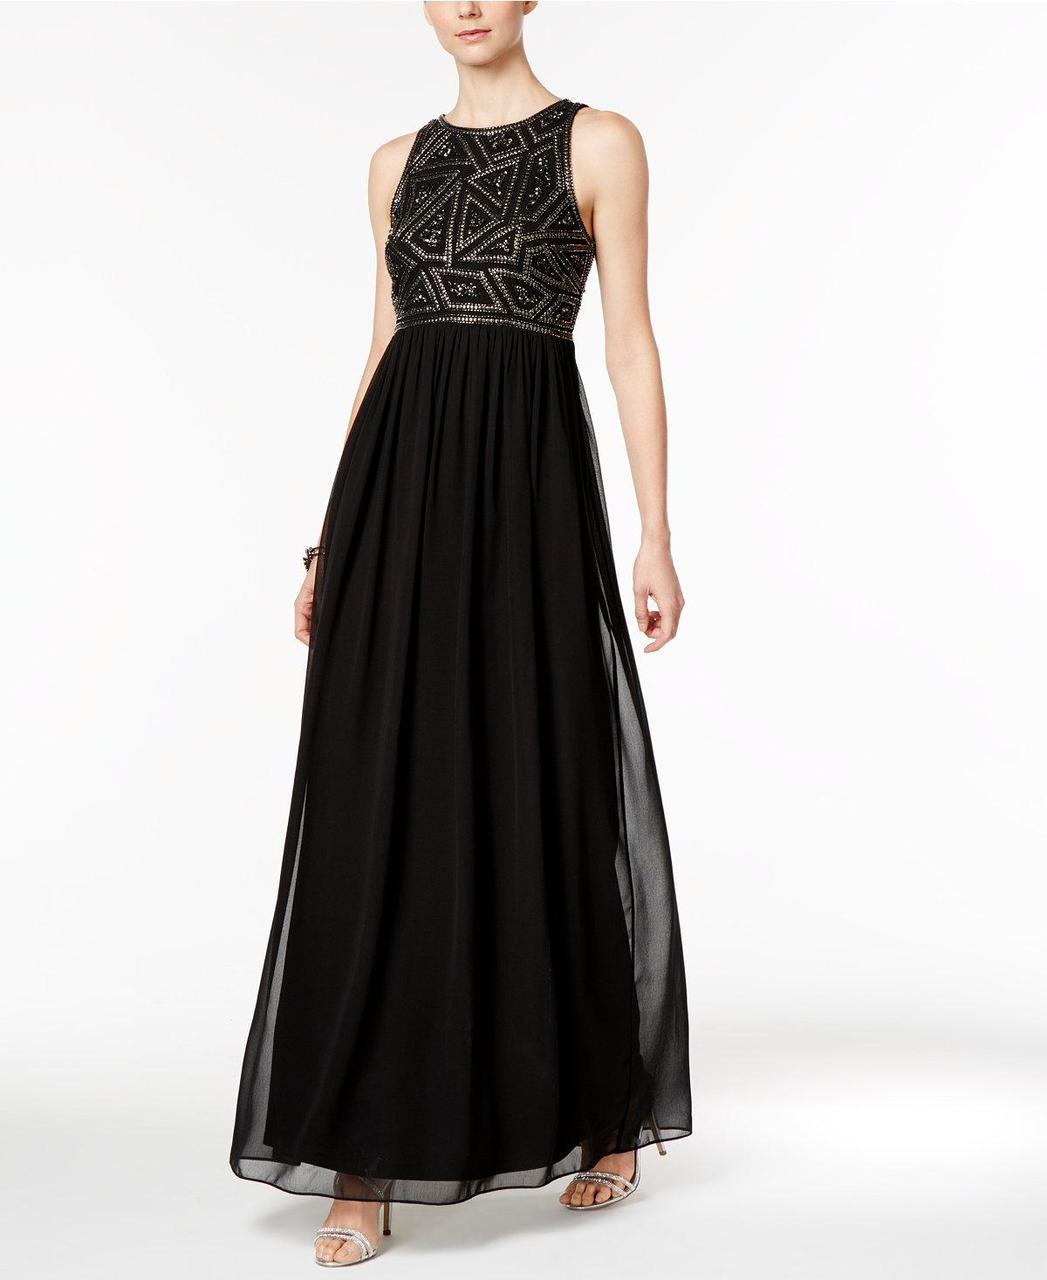 Adrianna Papell - 191910790 Embellished Jewel Ruched Gown